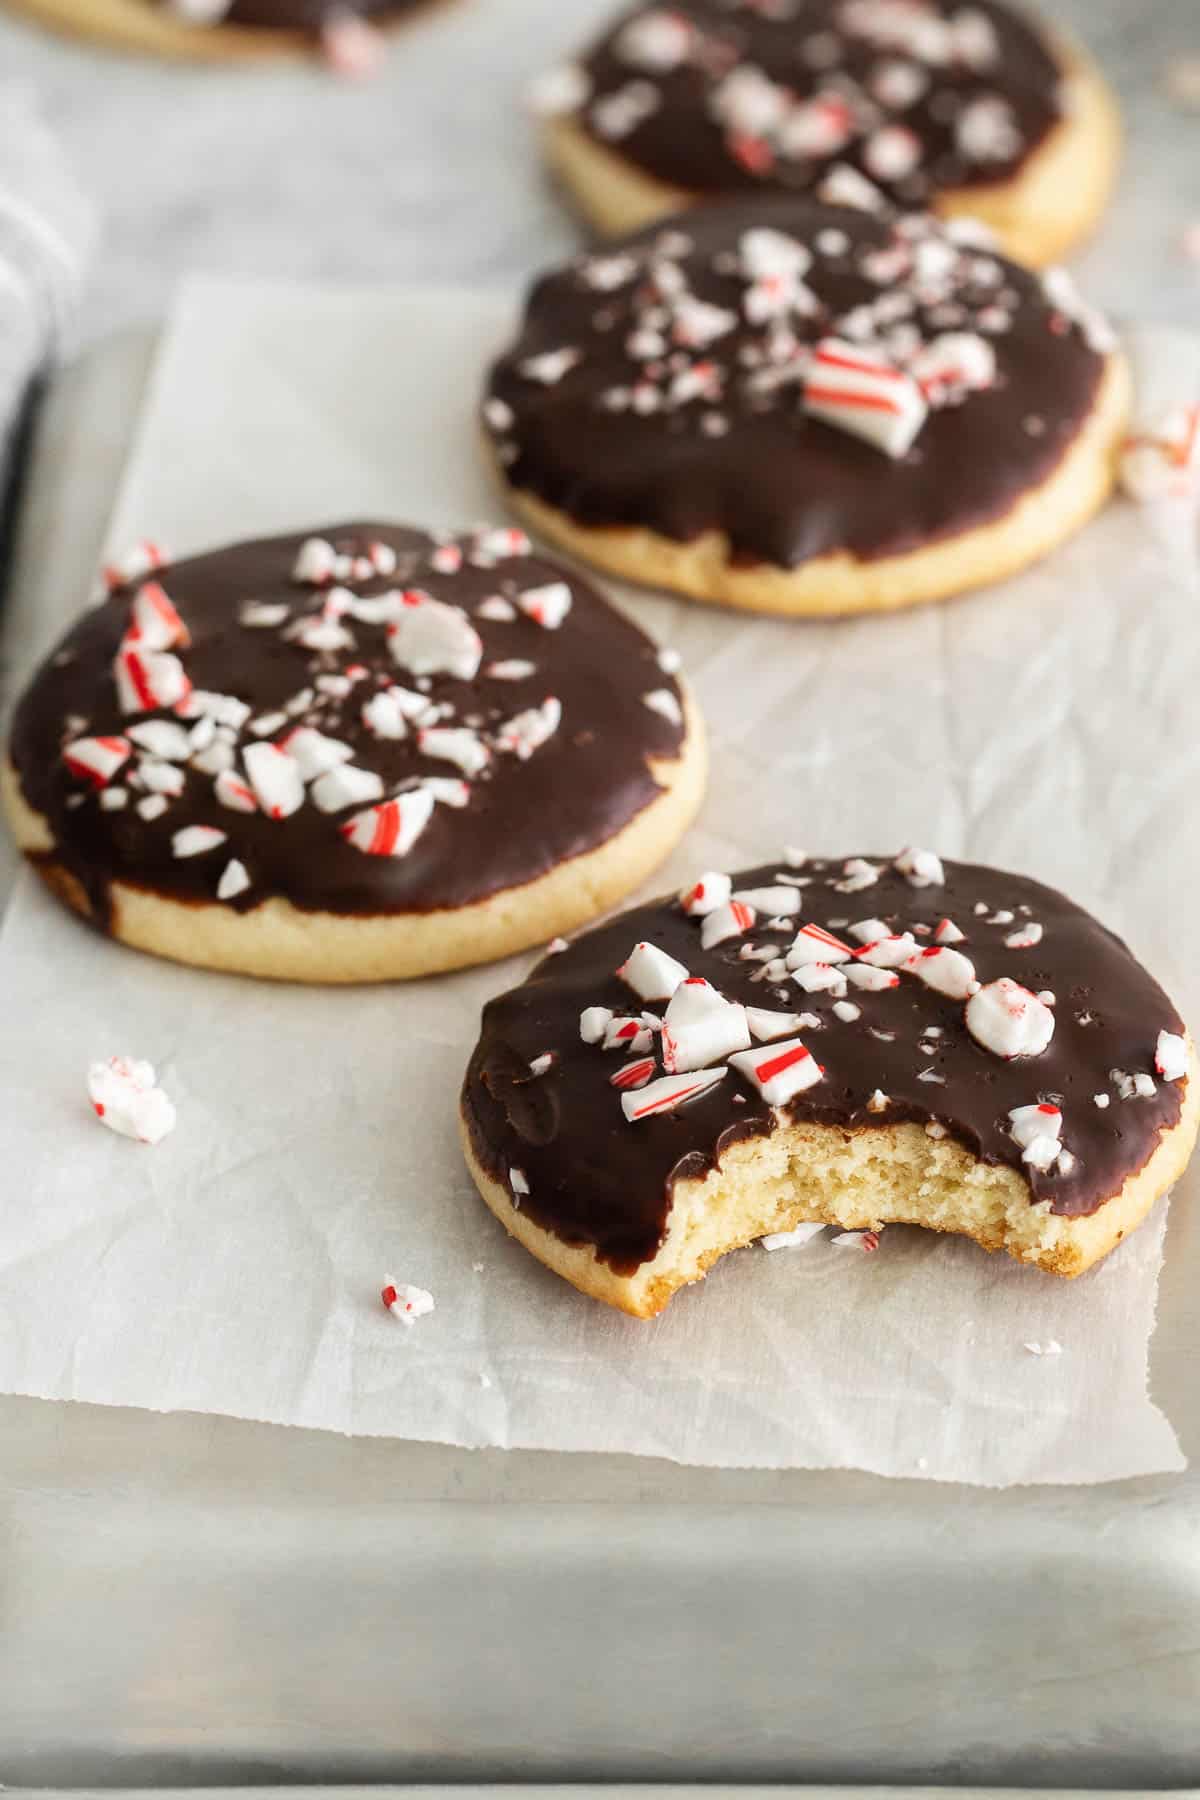 four chocolate covered cookies with peppermint candy pieces on top.